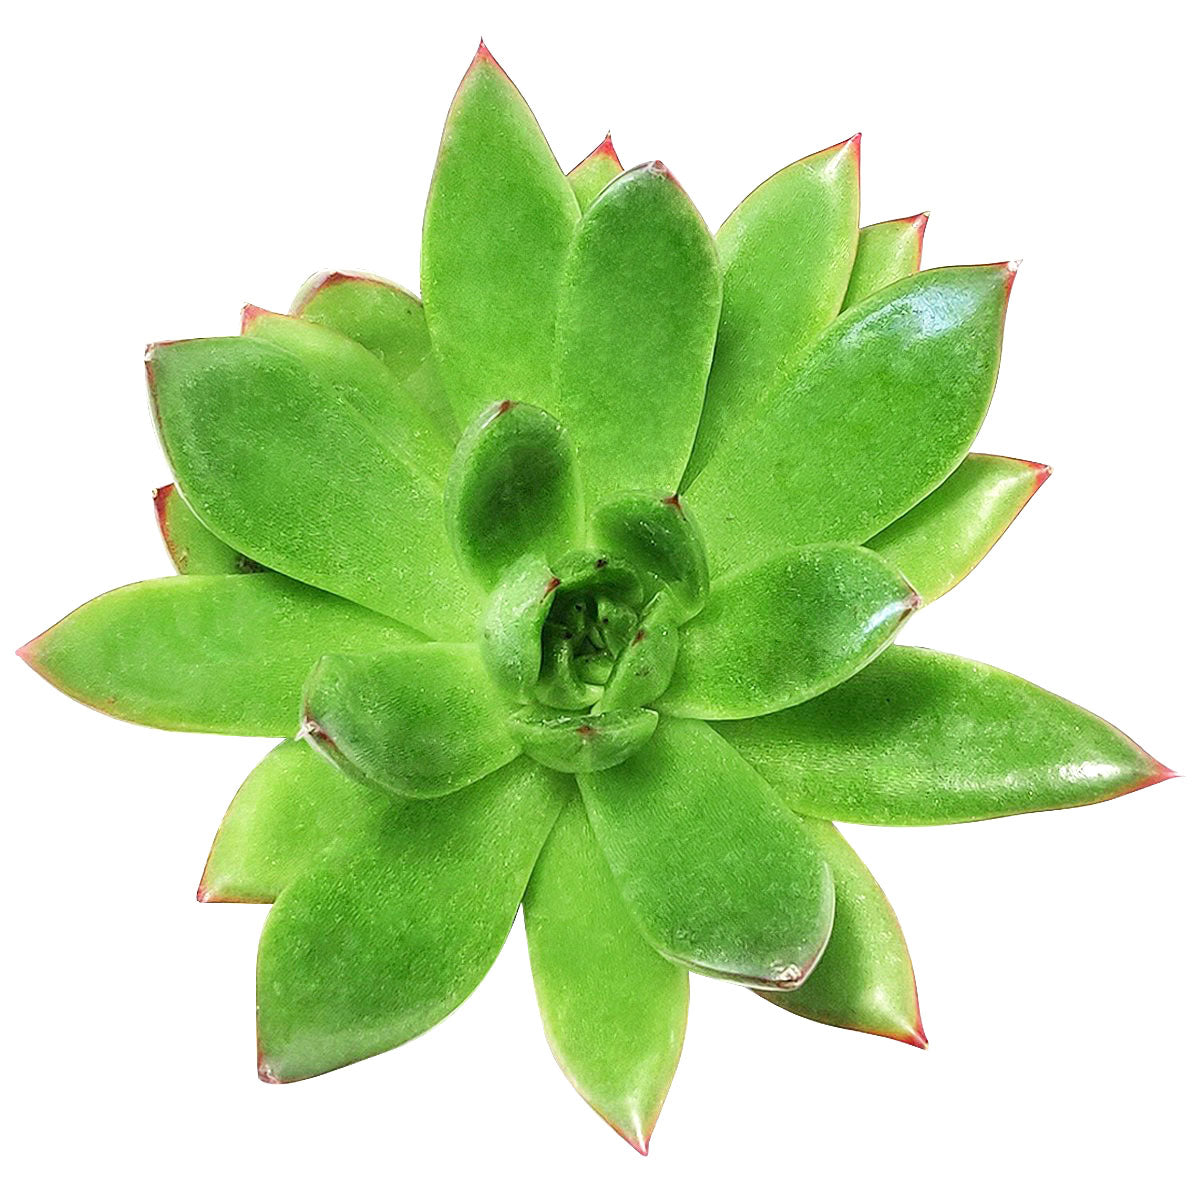 echeveria agavoides christmas for sale usa online, christmas succulent for sale, echeveria christmas where to buy, 2 inch/ 4 inch christmas cactus succulent plant as gift